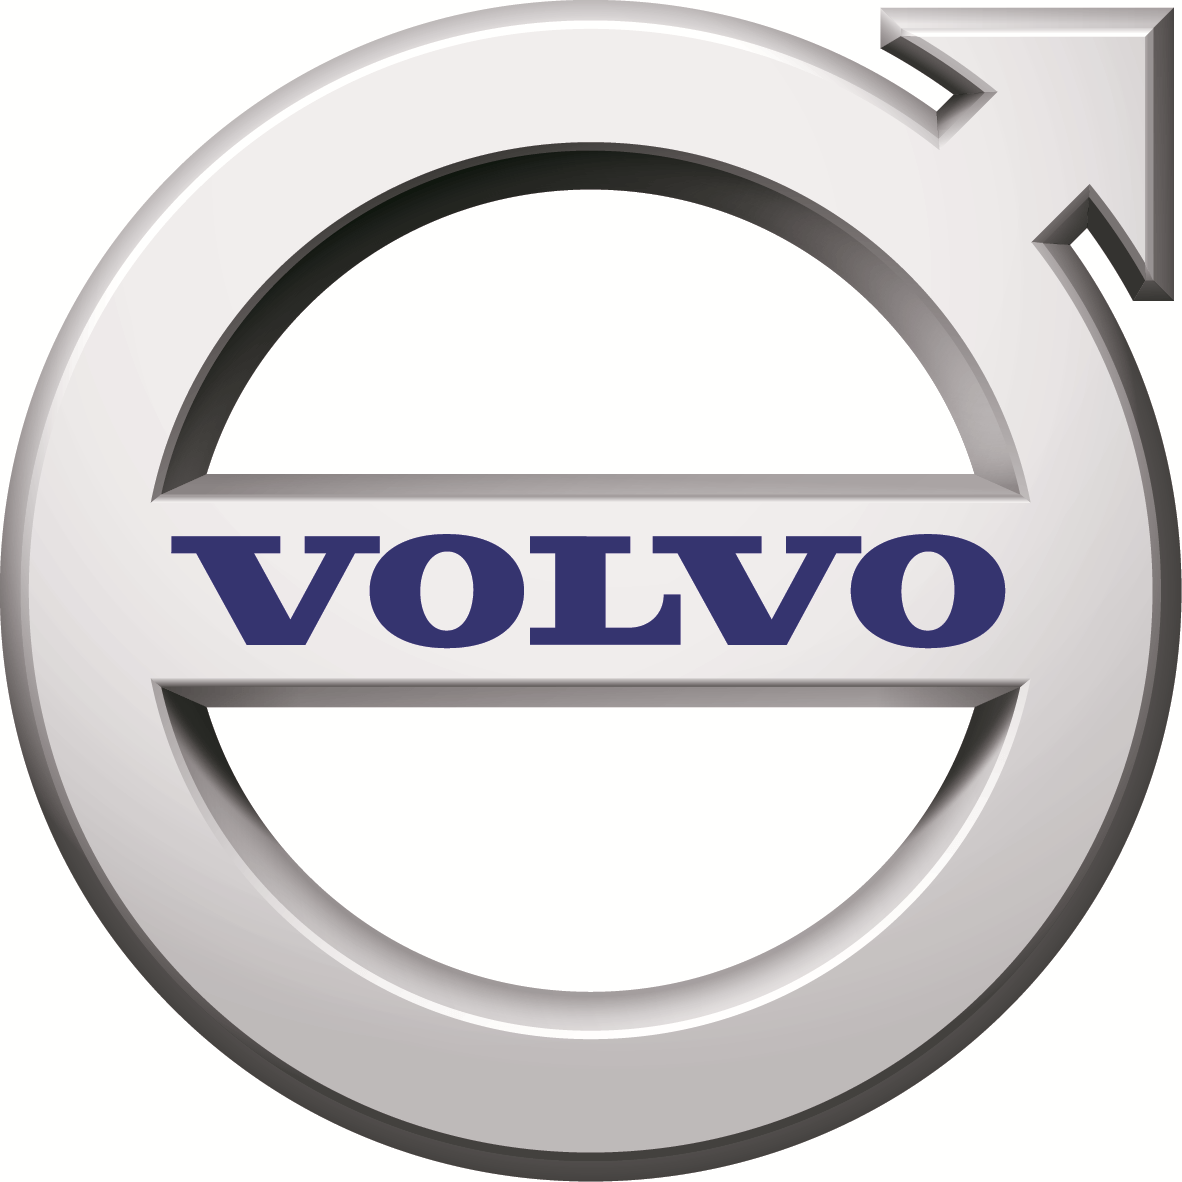 Volvo Bus Logo - Volvo Logo Png (98+ images in Collection) Page 3